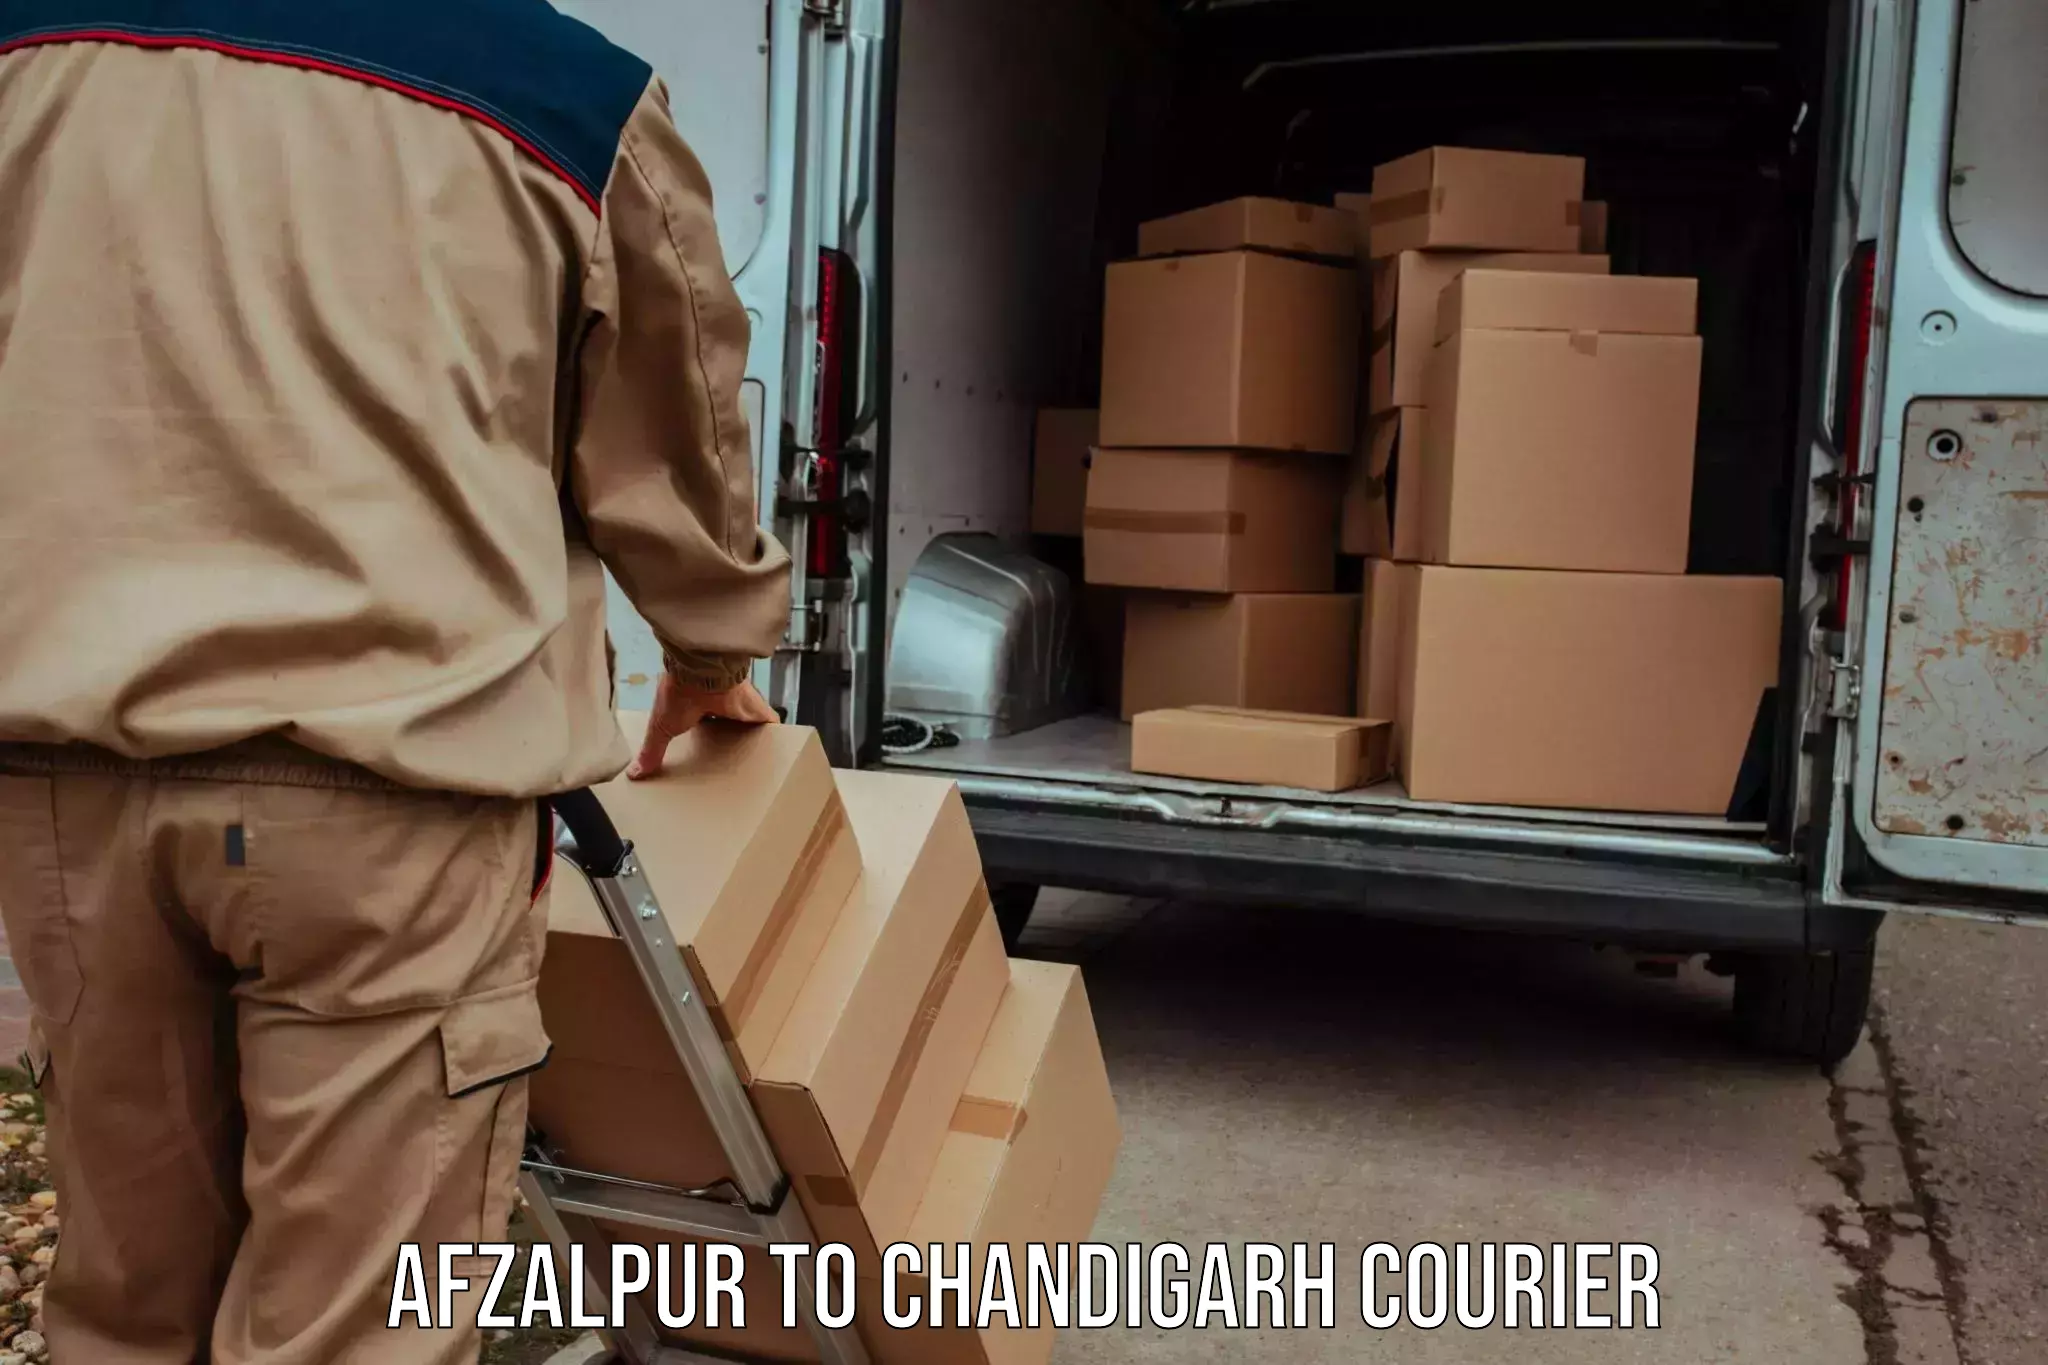 Reliable logistics providers Afzalpur to Chandigarh